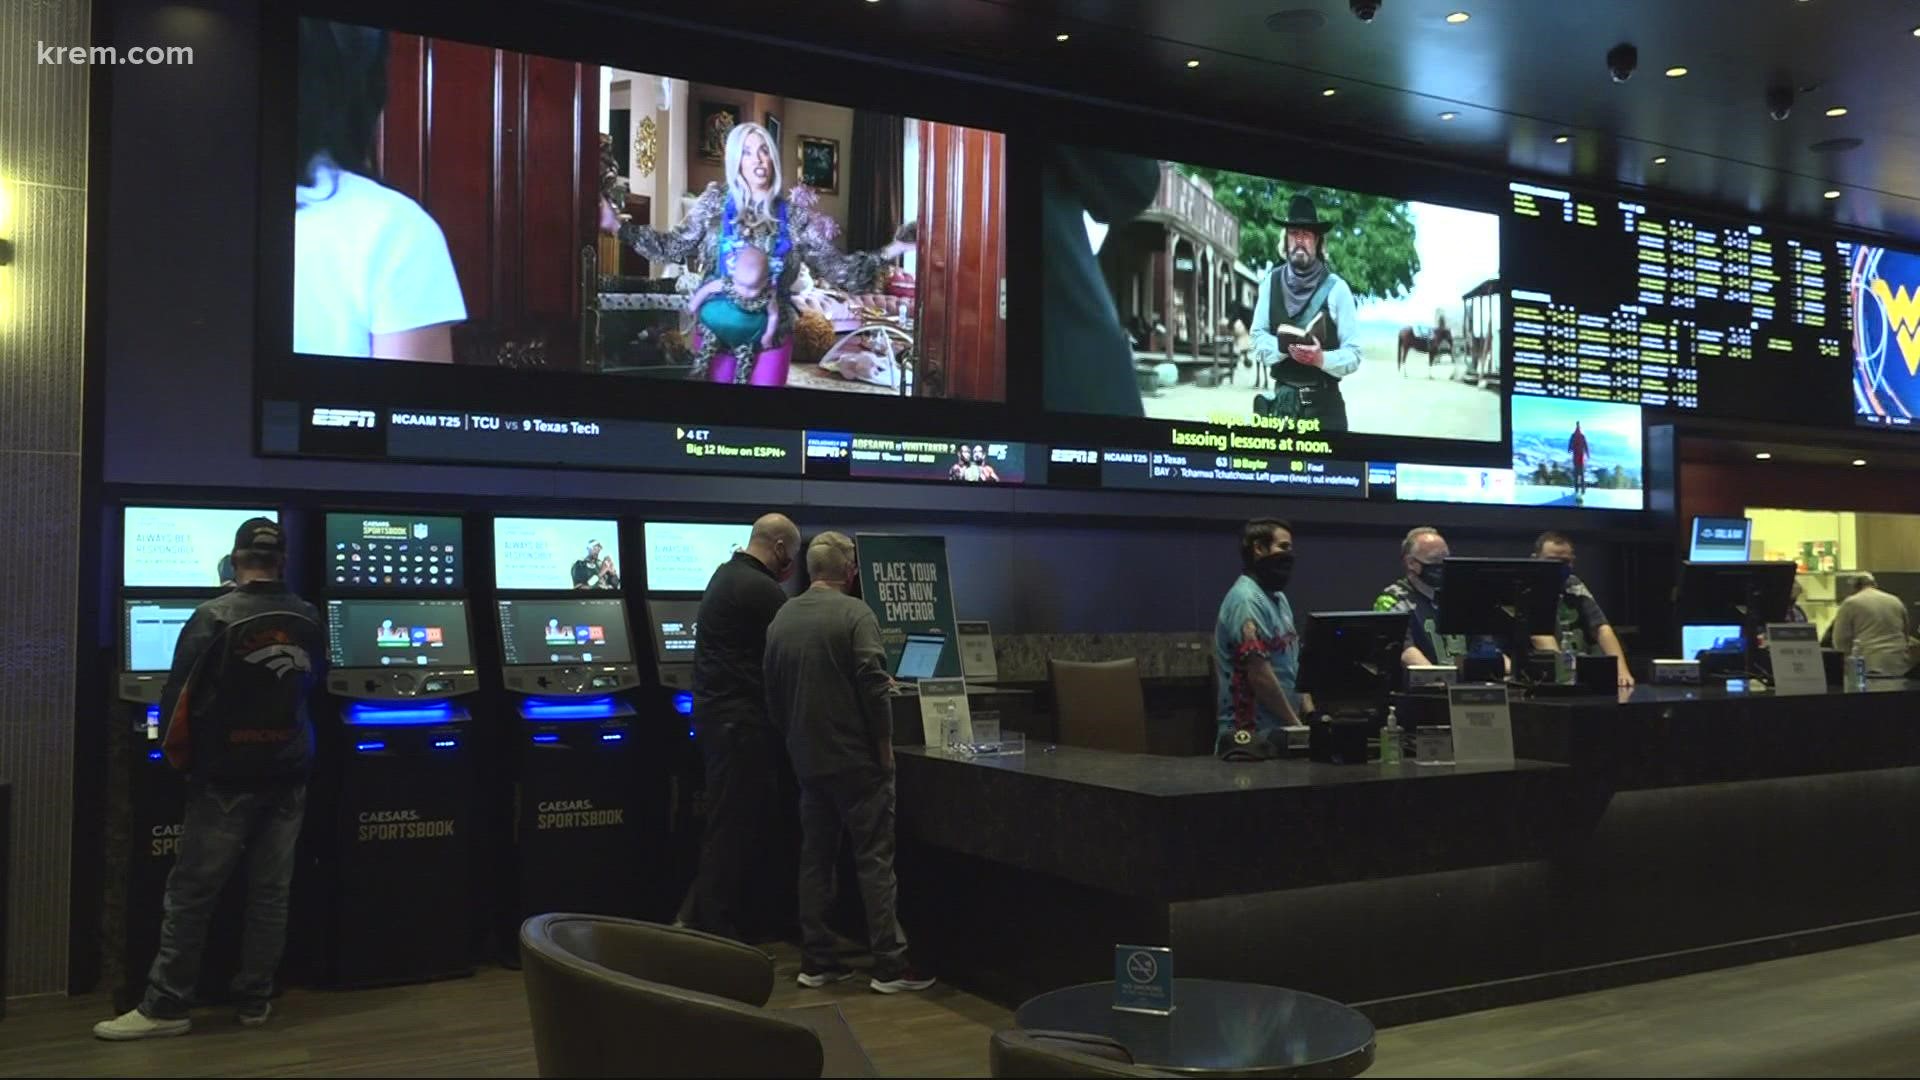 Caesars Sportsbook opened at Spokane Tribe Casino and allows local sports betters to place their bets ahead of major sporting events.